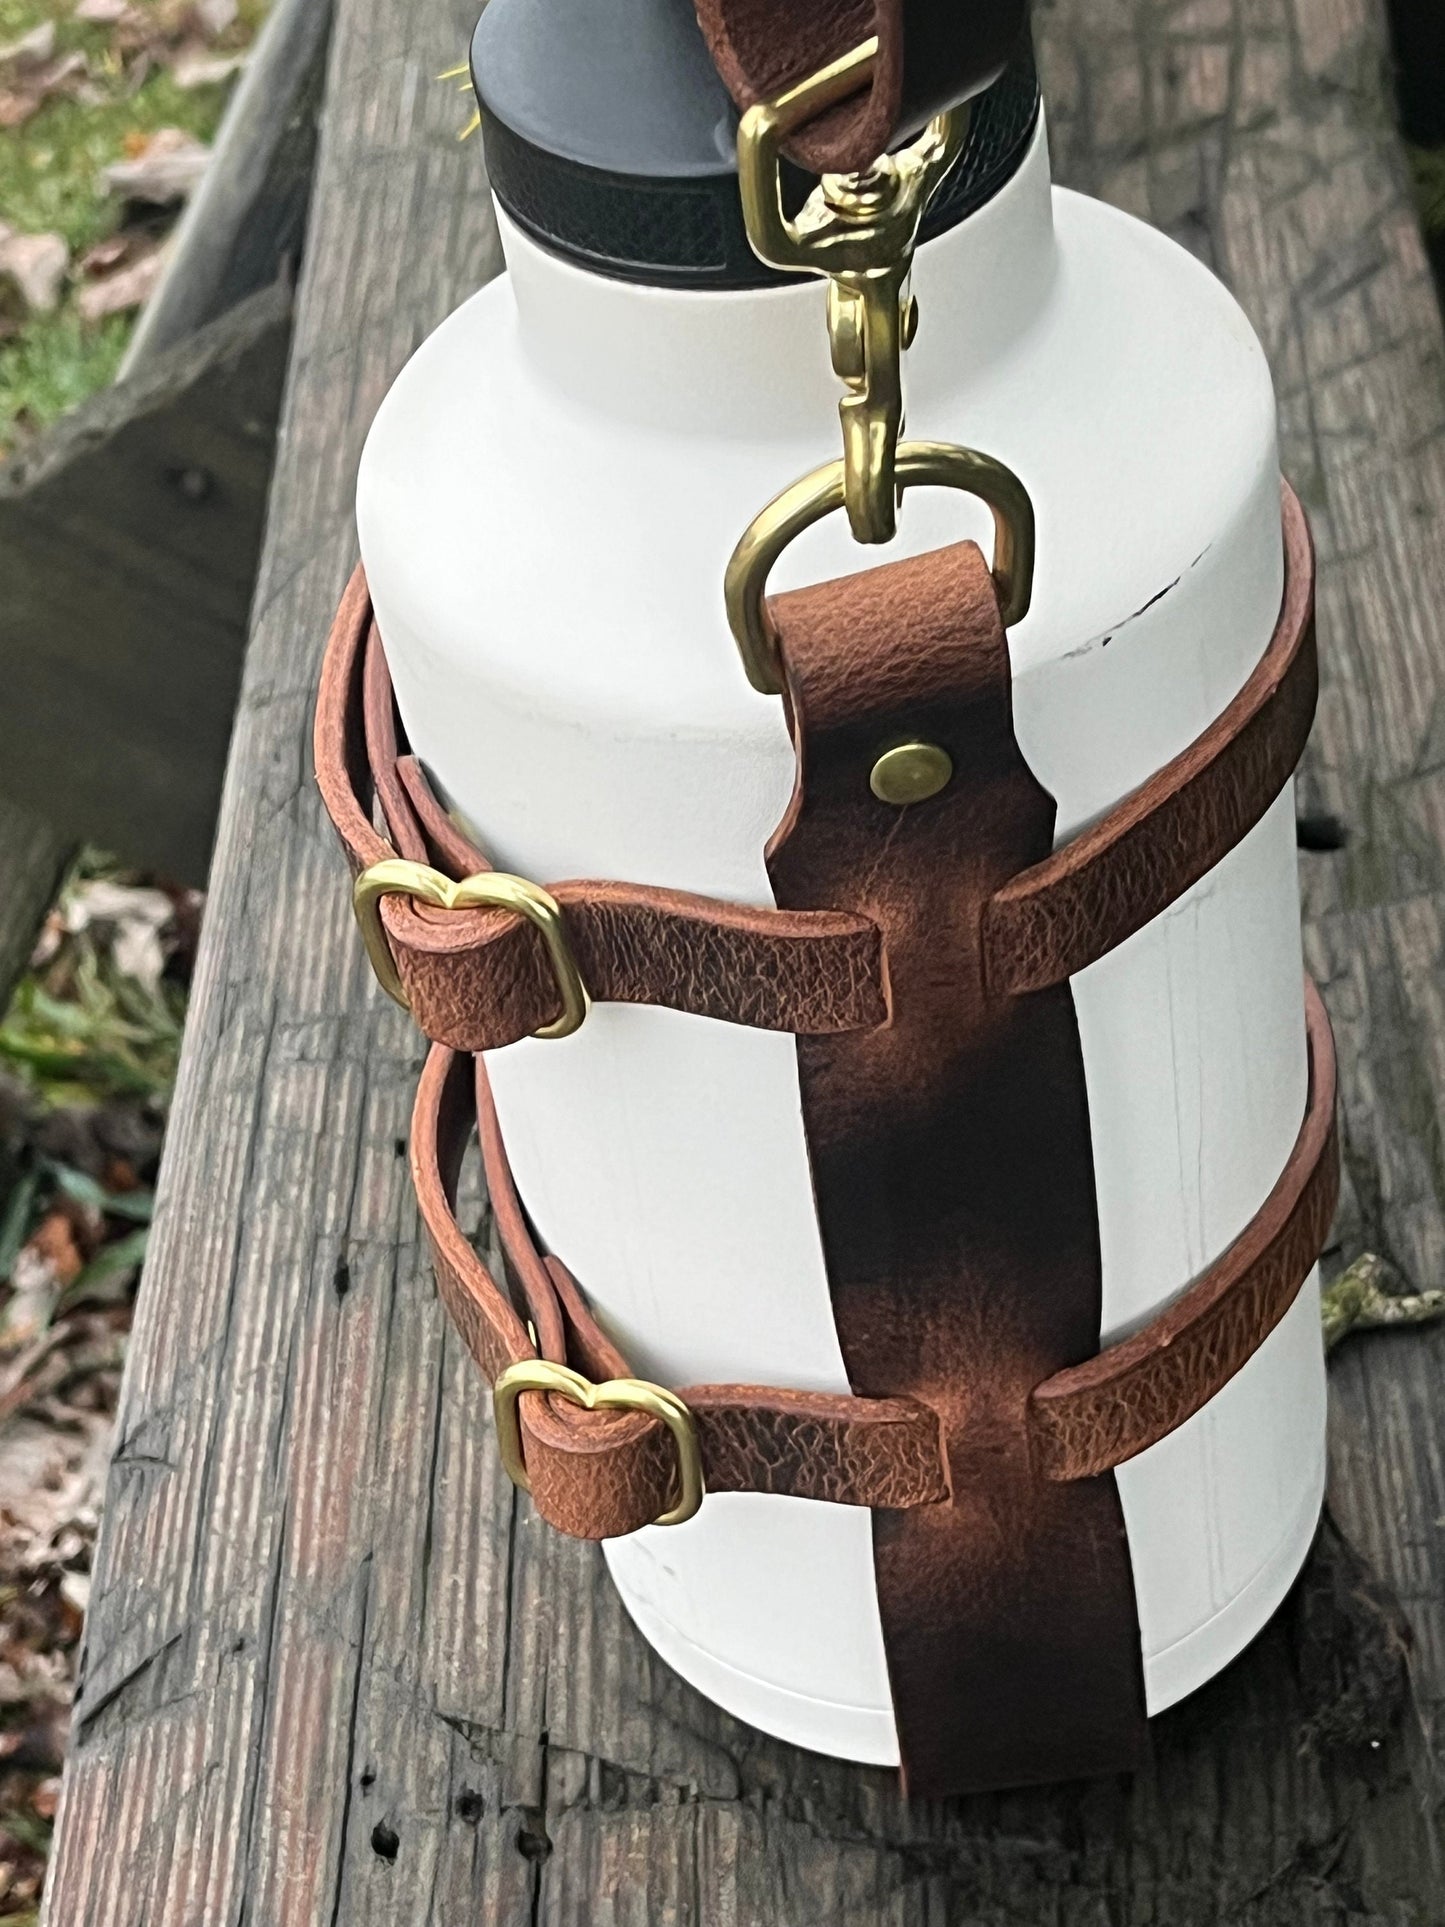 Adjustable Full Grain Water Buffalo leather water bottle carrier with shoulder strap- half gallon